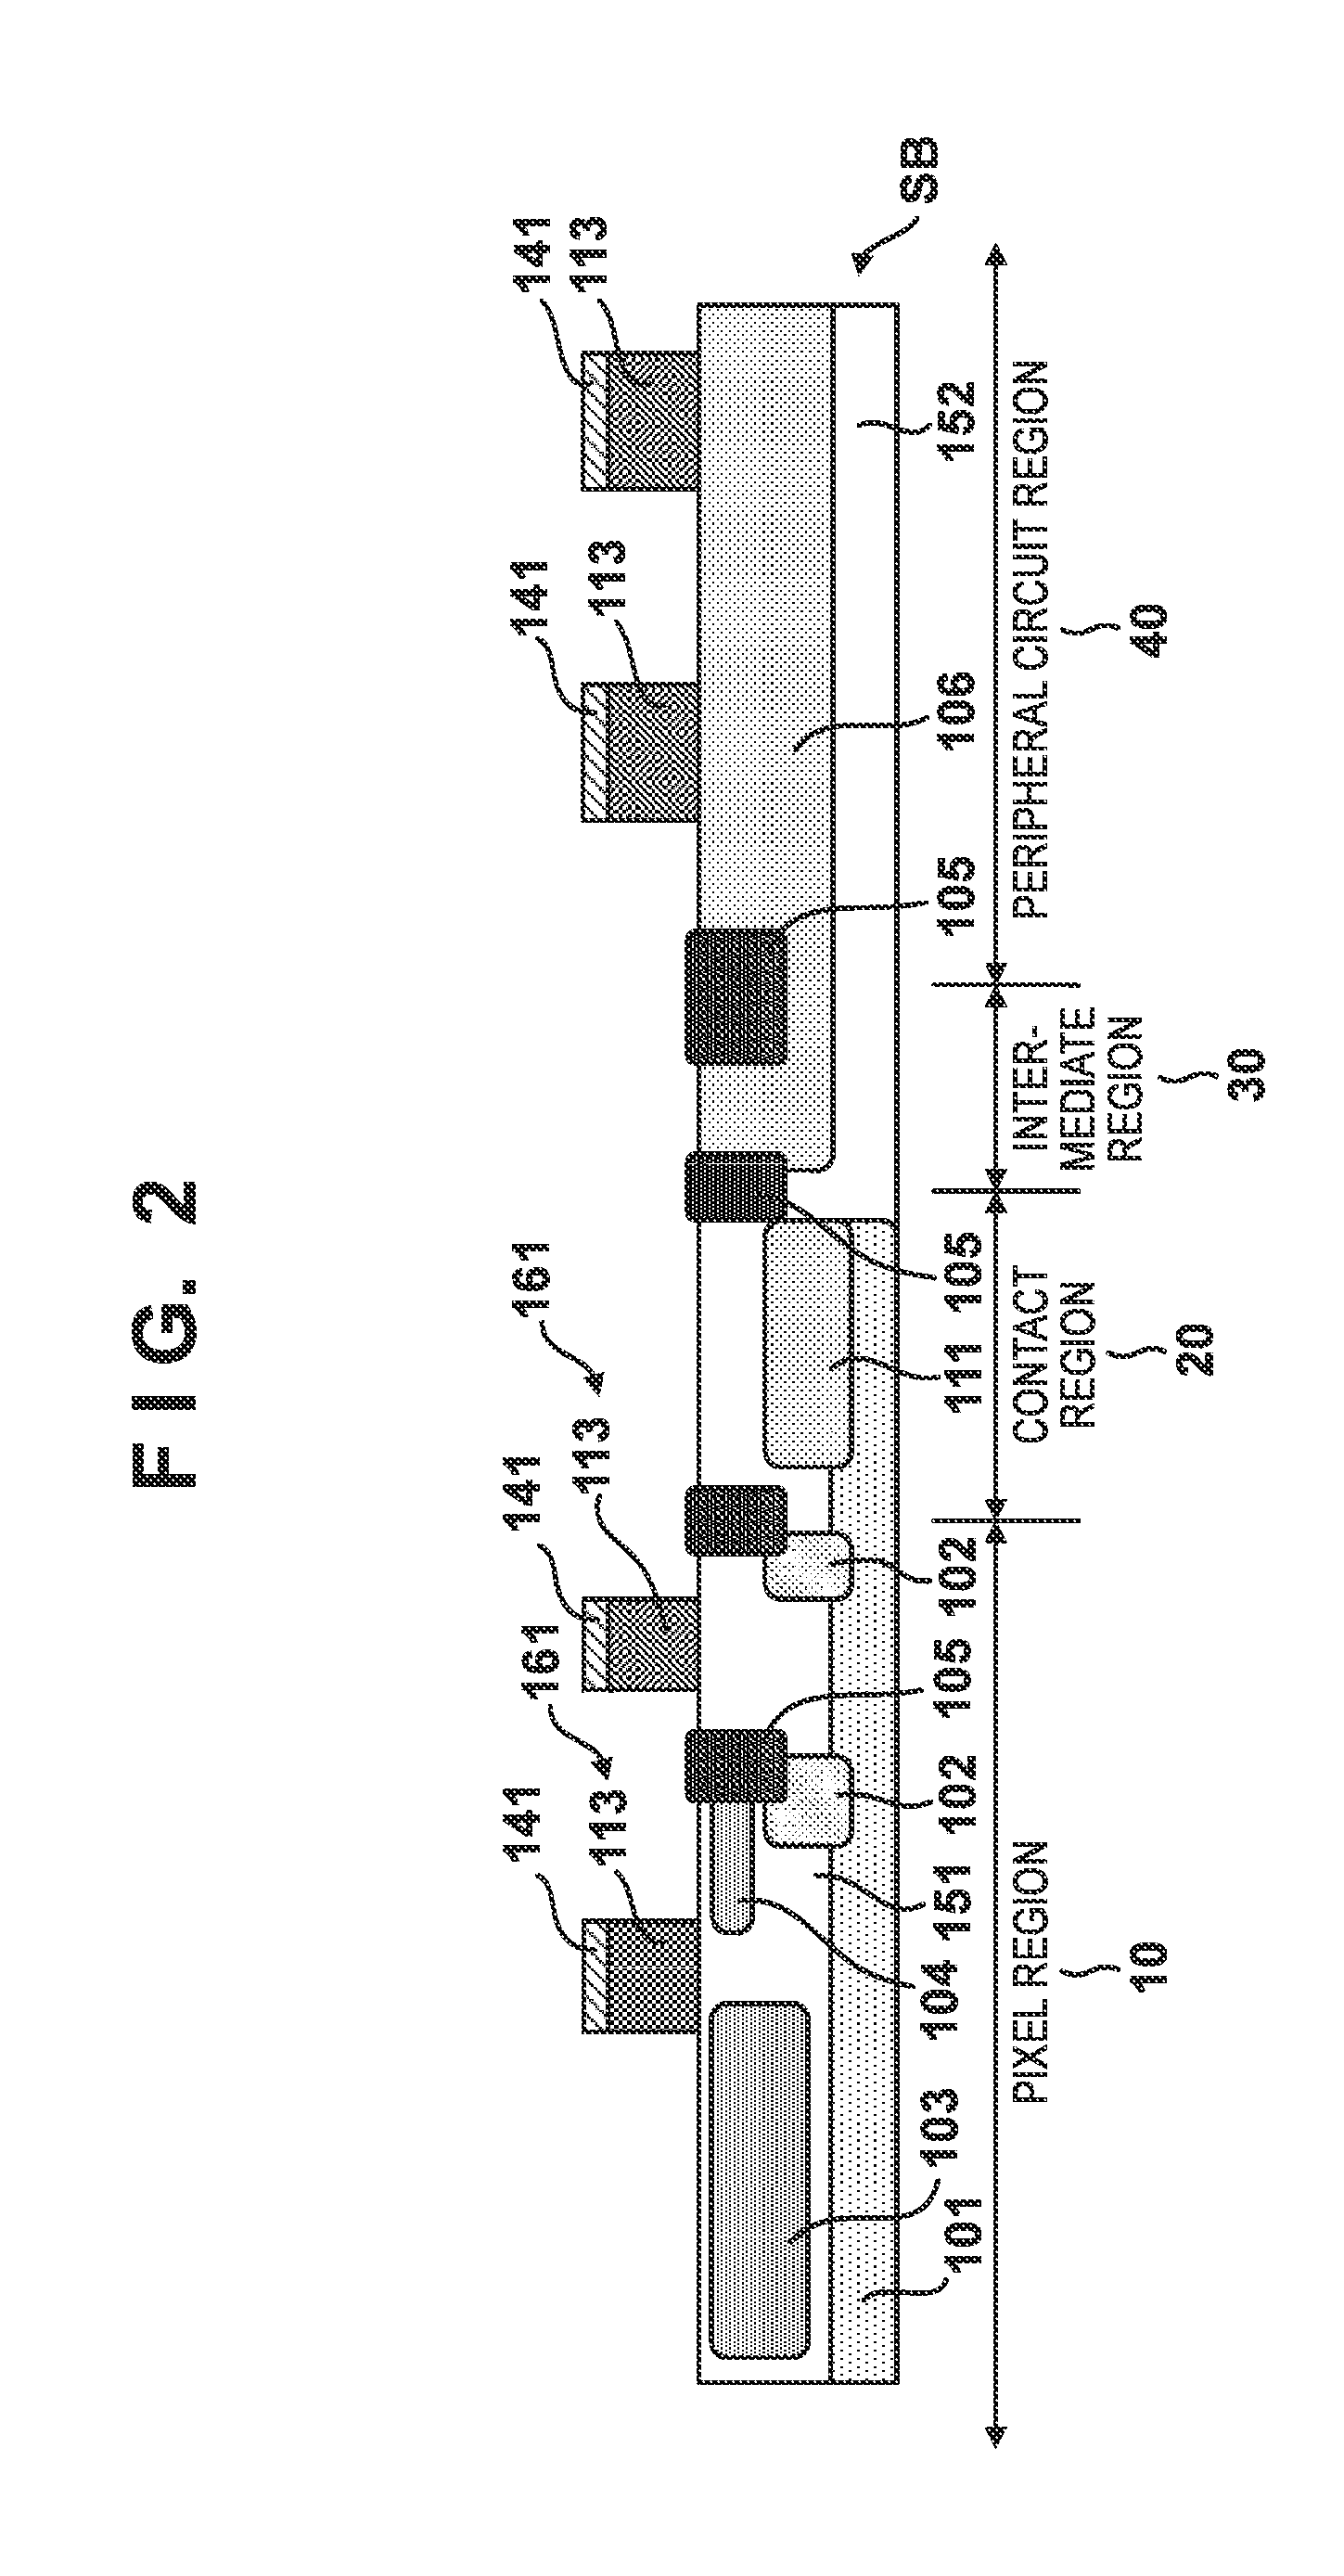 Solid-state image sensor, method for manufacturing the same, and camera